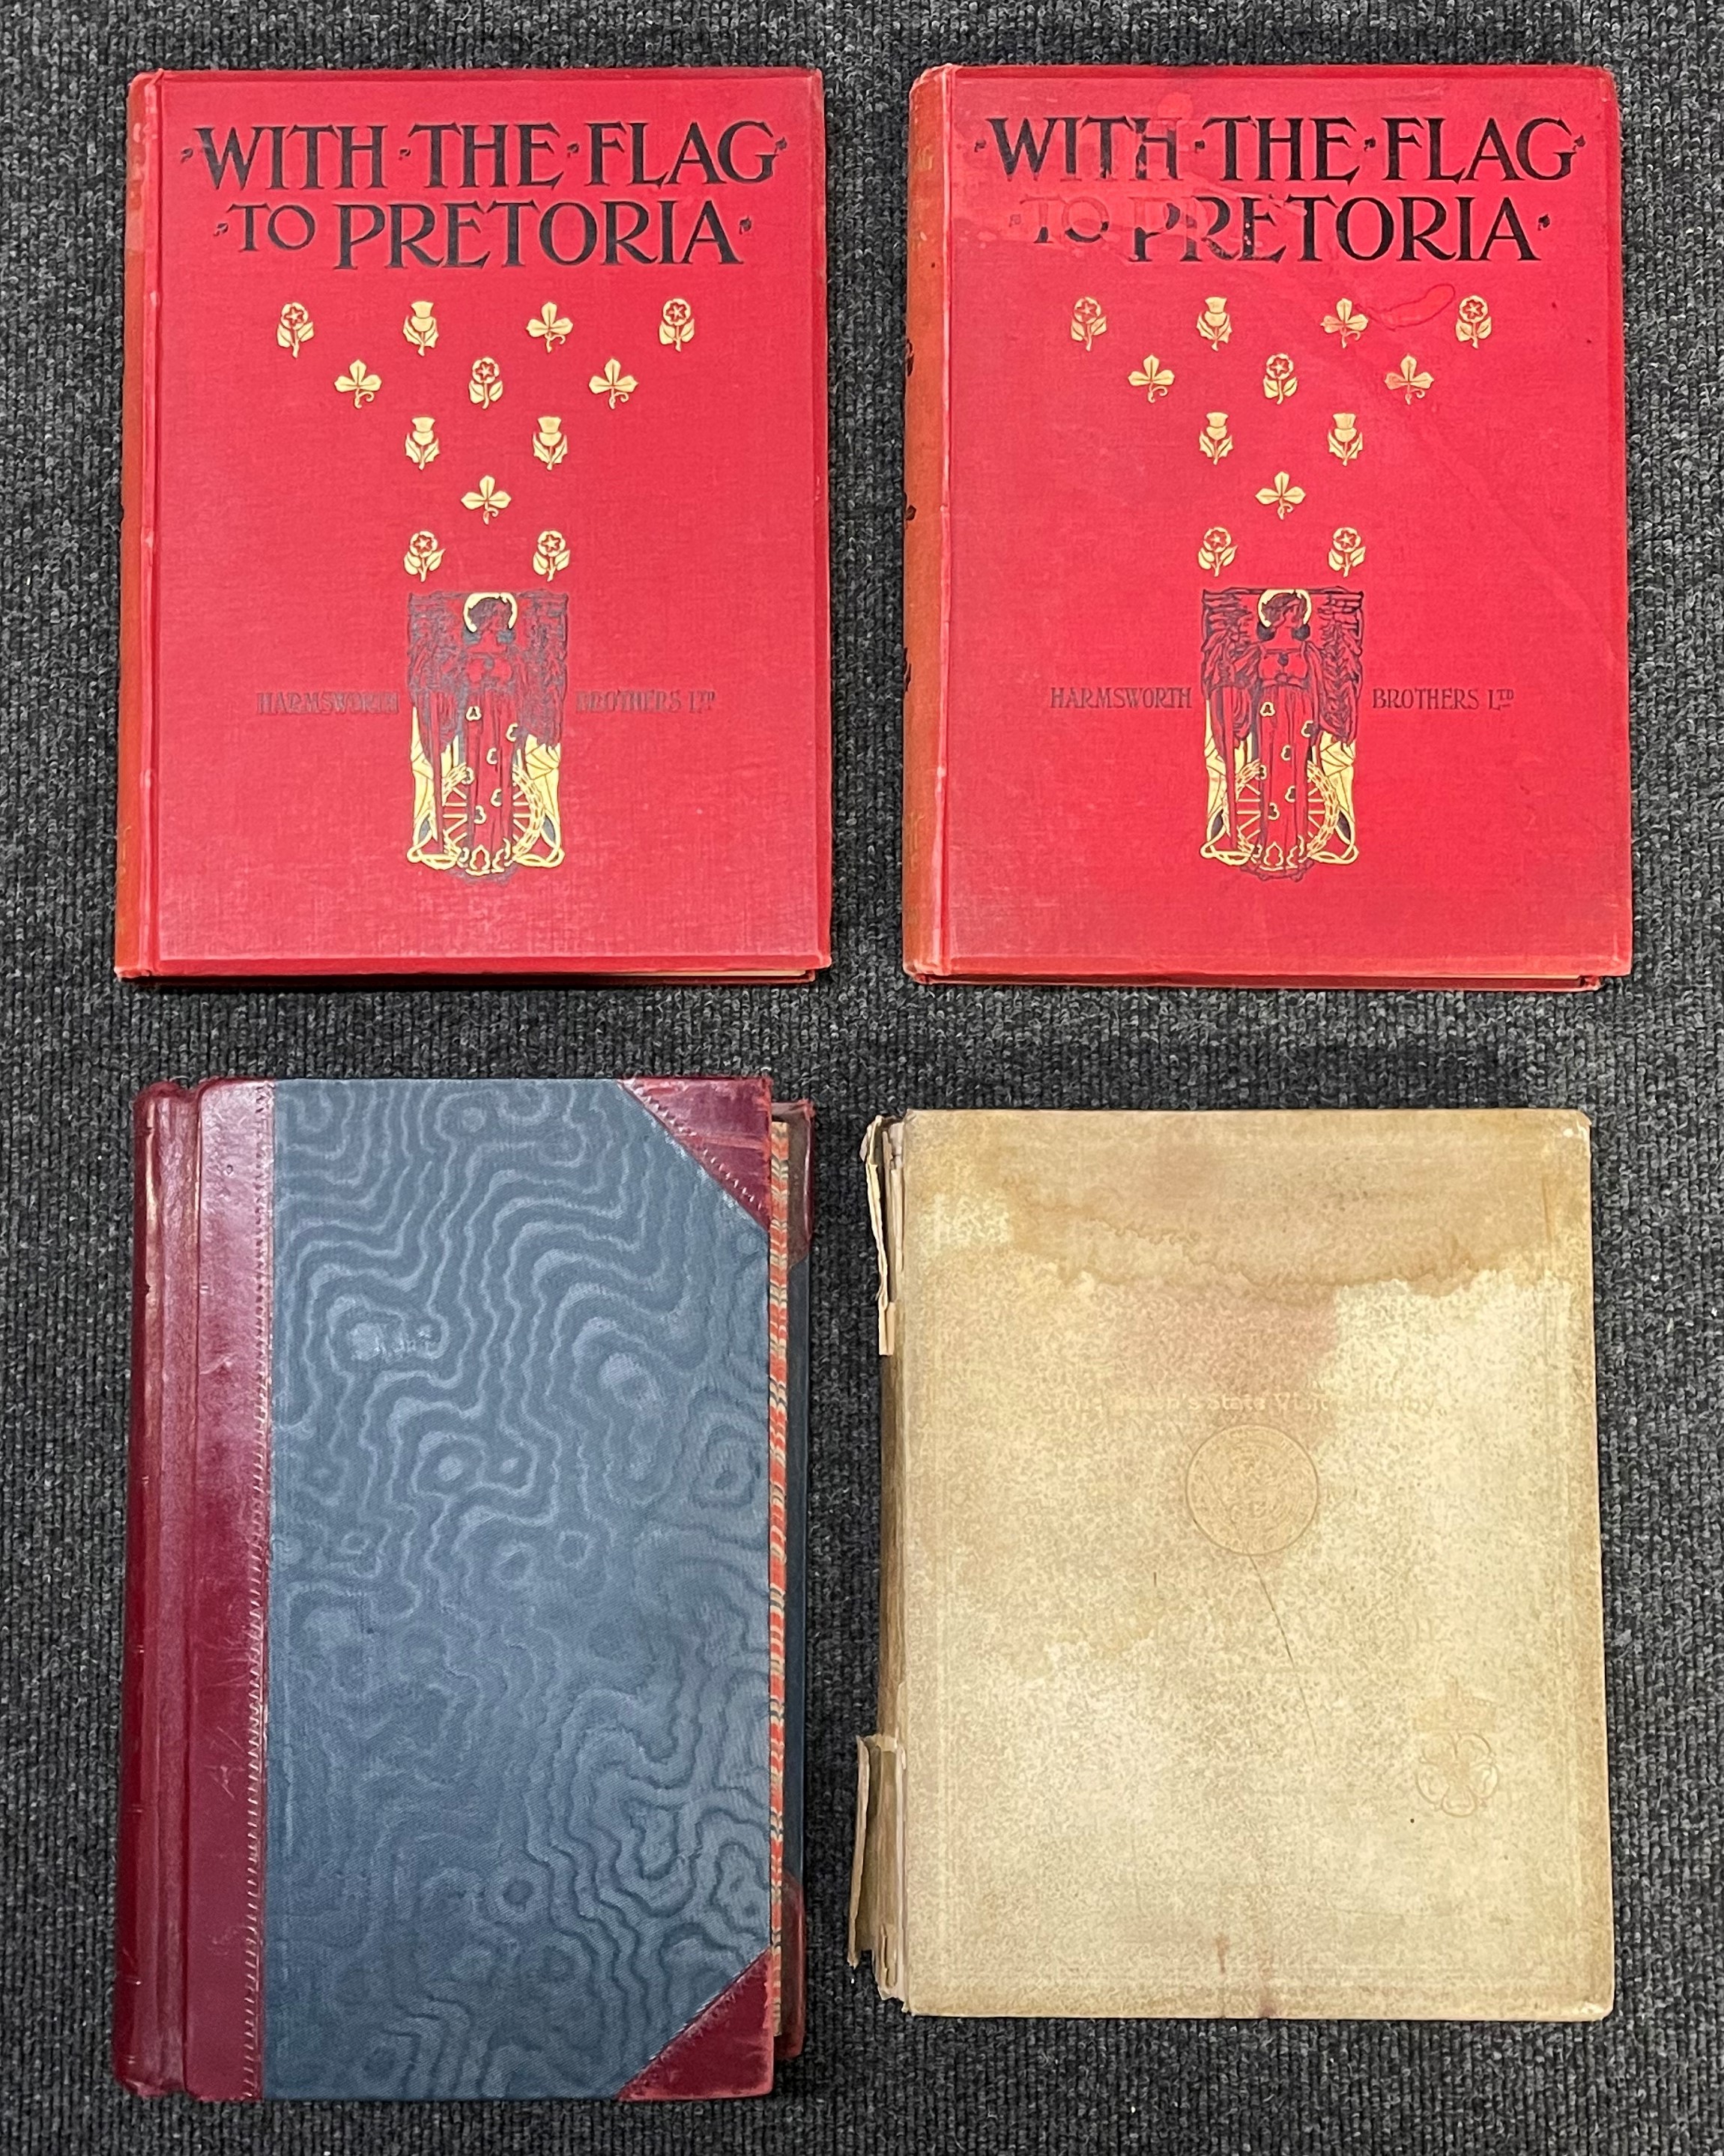 Boer War History books "With the Flag to Pretoria". Volumes 1 & 2. Published by Harmsworth